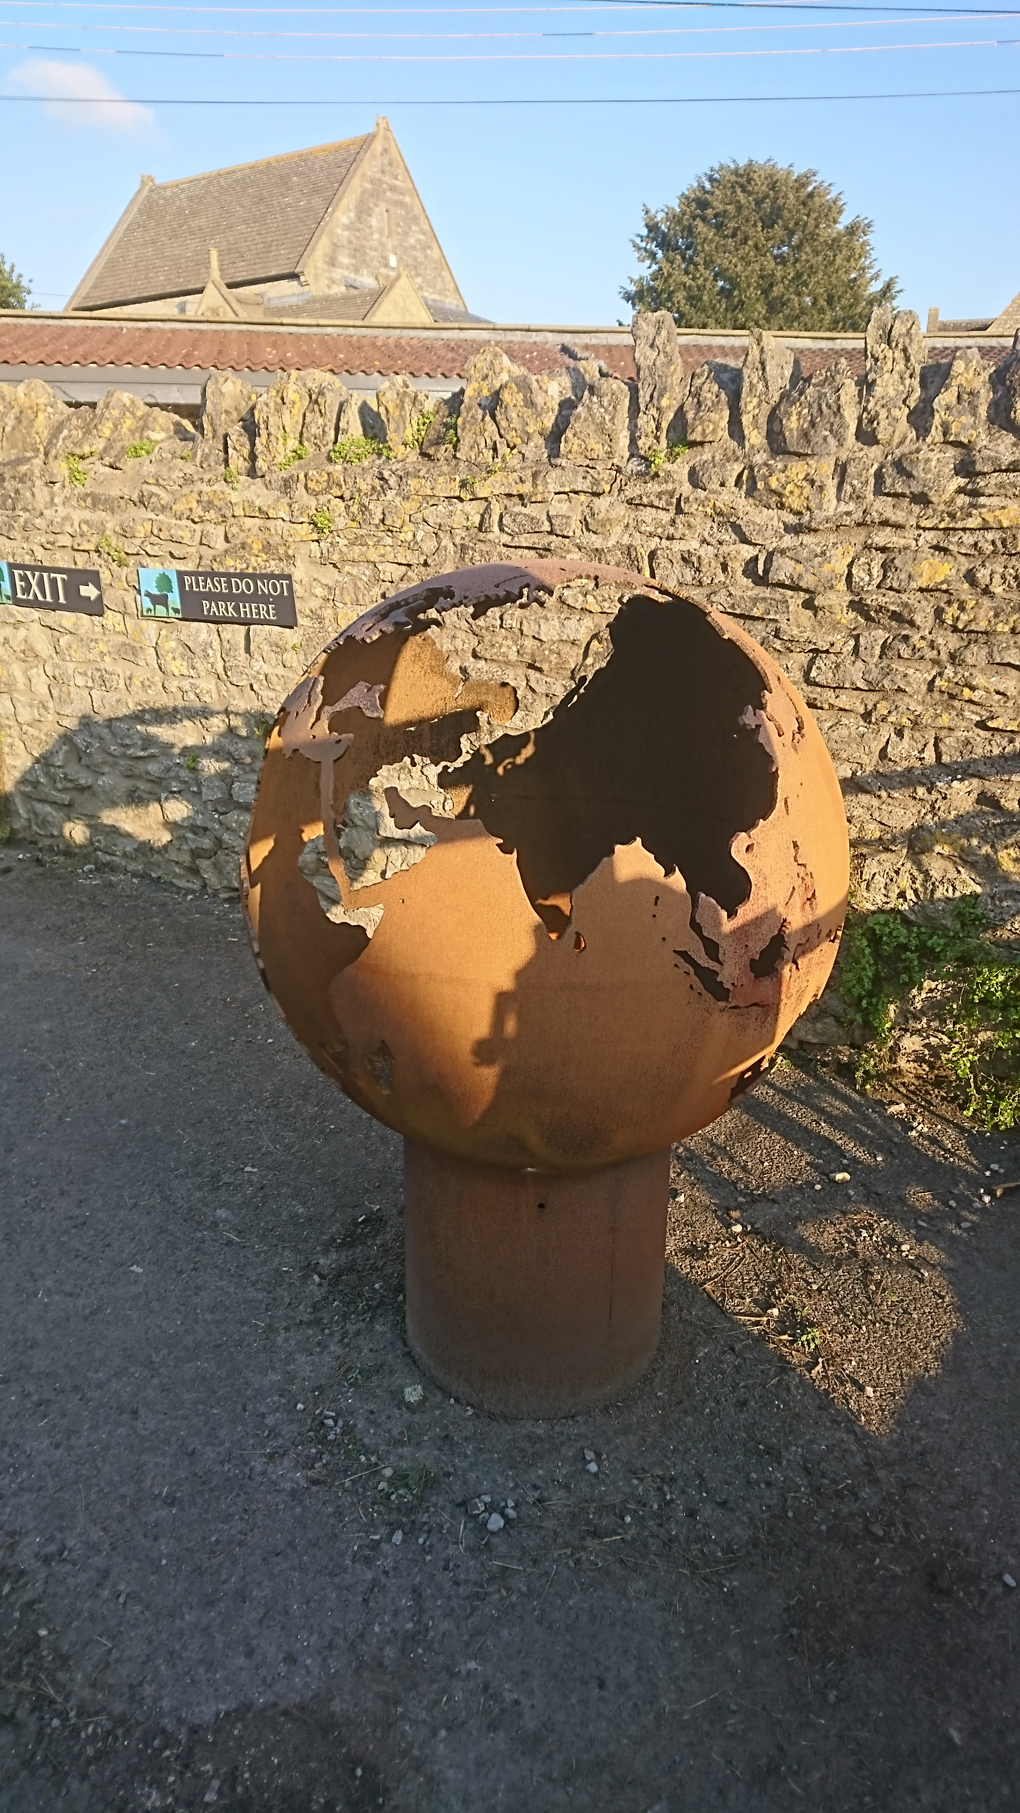 A rusty old globe of metal approx 3 1/2ft in diameter, set on a smaller cylindrical tube of the same. The map of the world had been cleverly cut out in the surface of the globe, the rust illuminated in the sunlight. Cool concept for a sculpture!